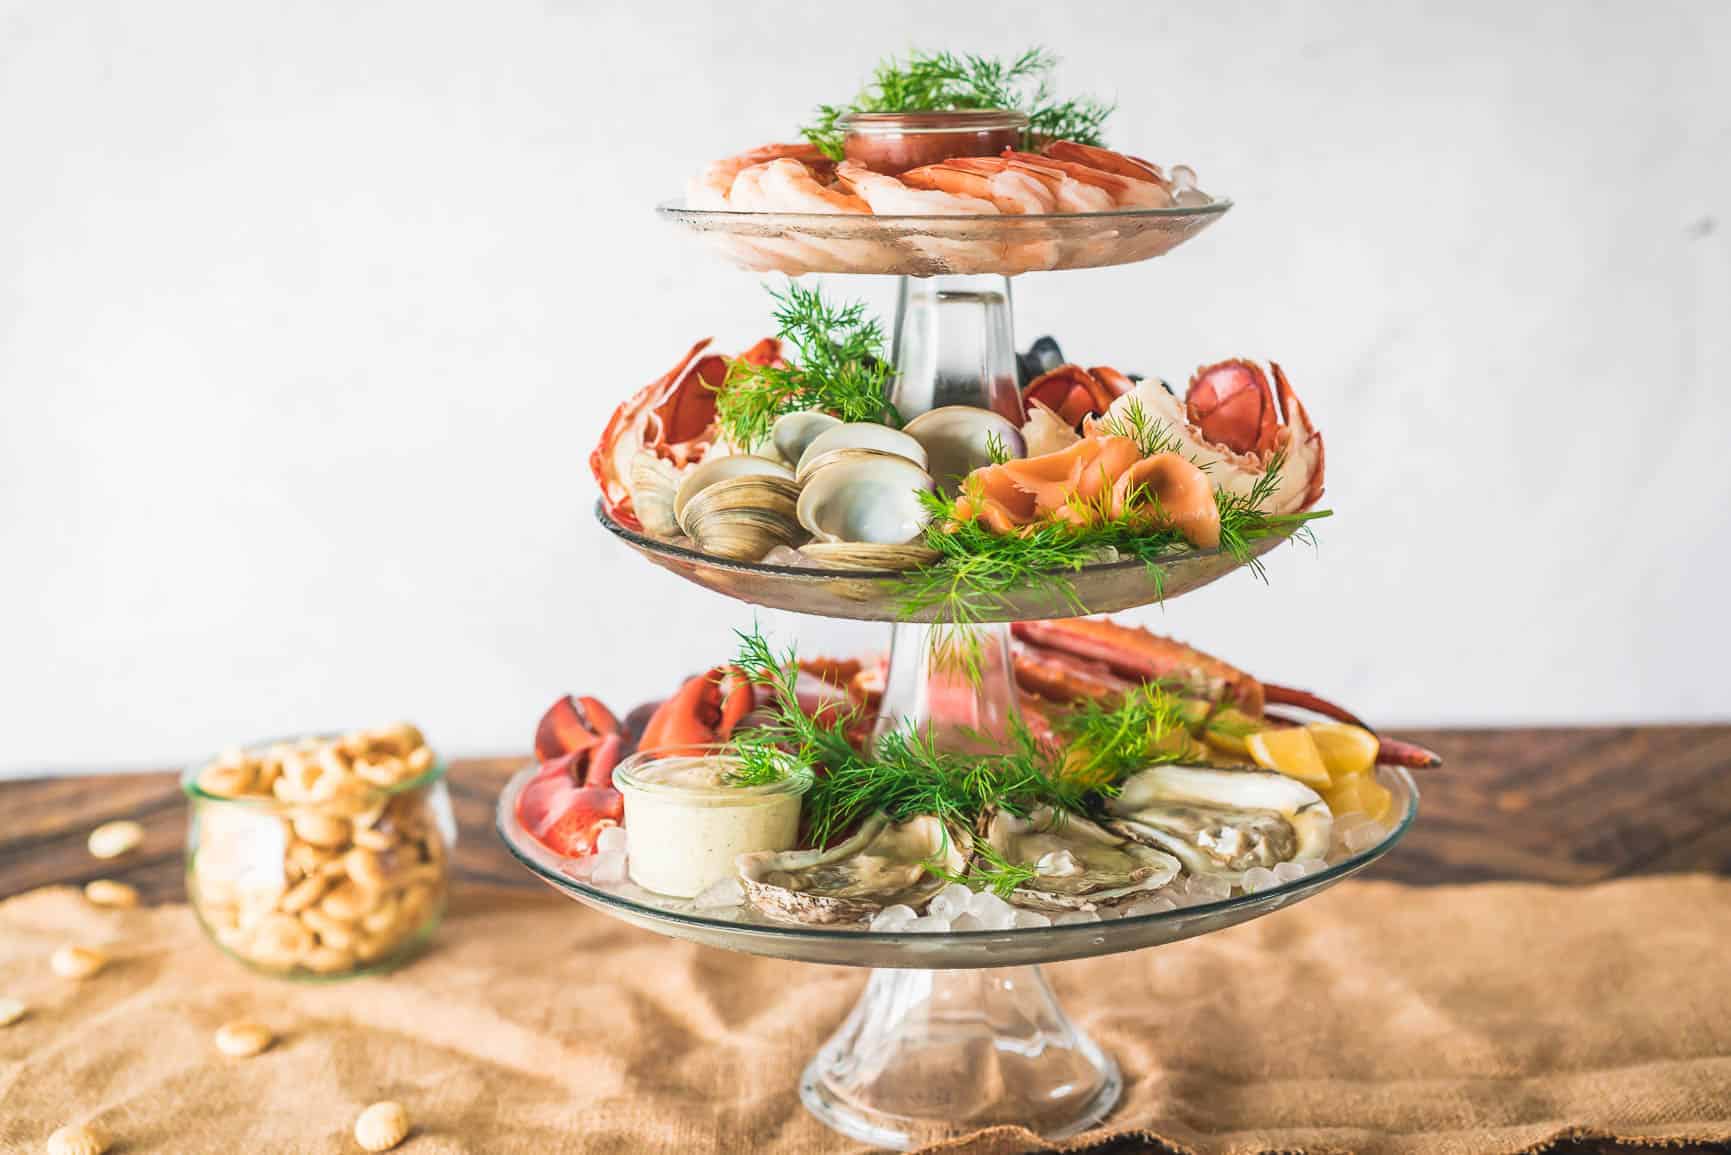 How to make the Ultimate Holiday Chilled Seafood Tower DIY #ad #FlavorYourWorld #CollectiveBias #Feastof7Fishes